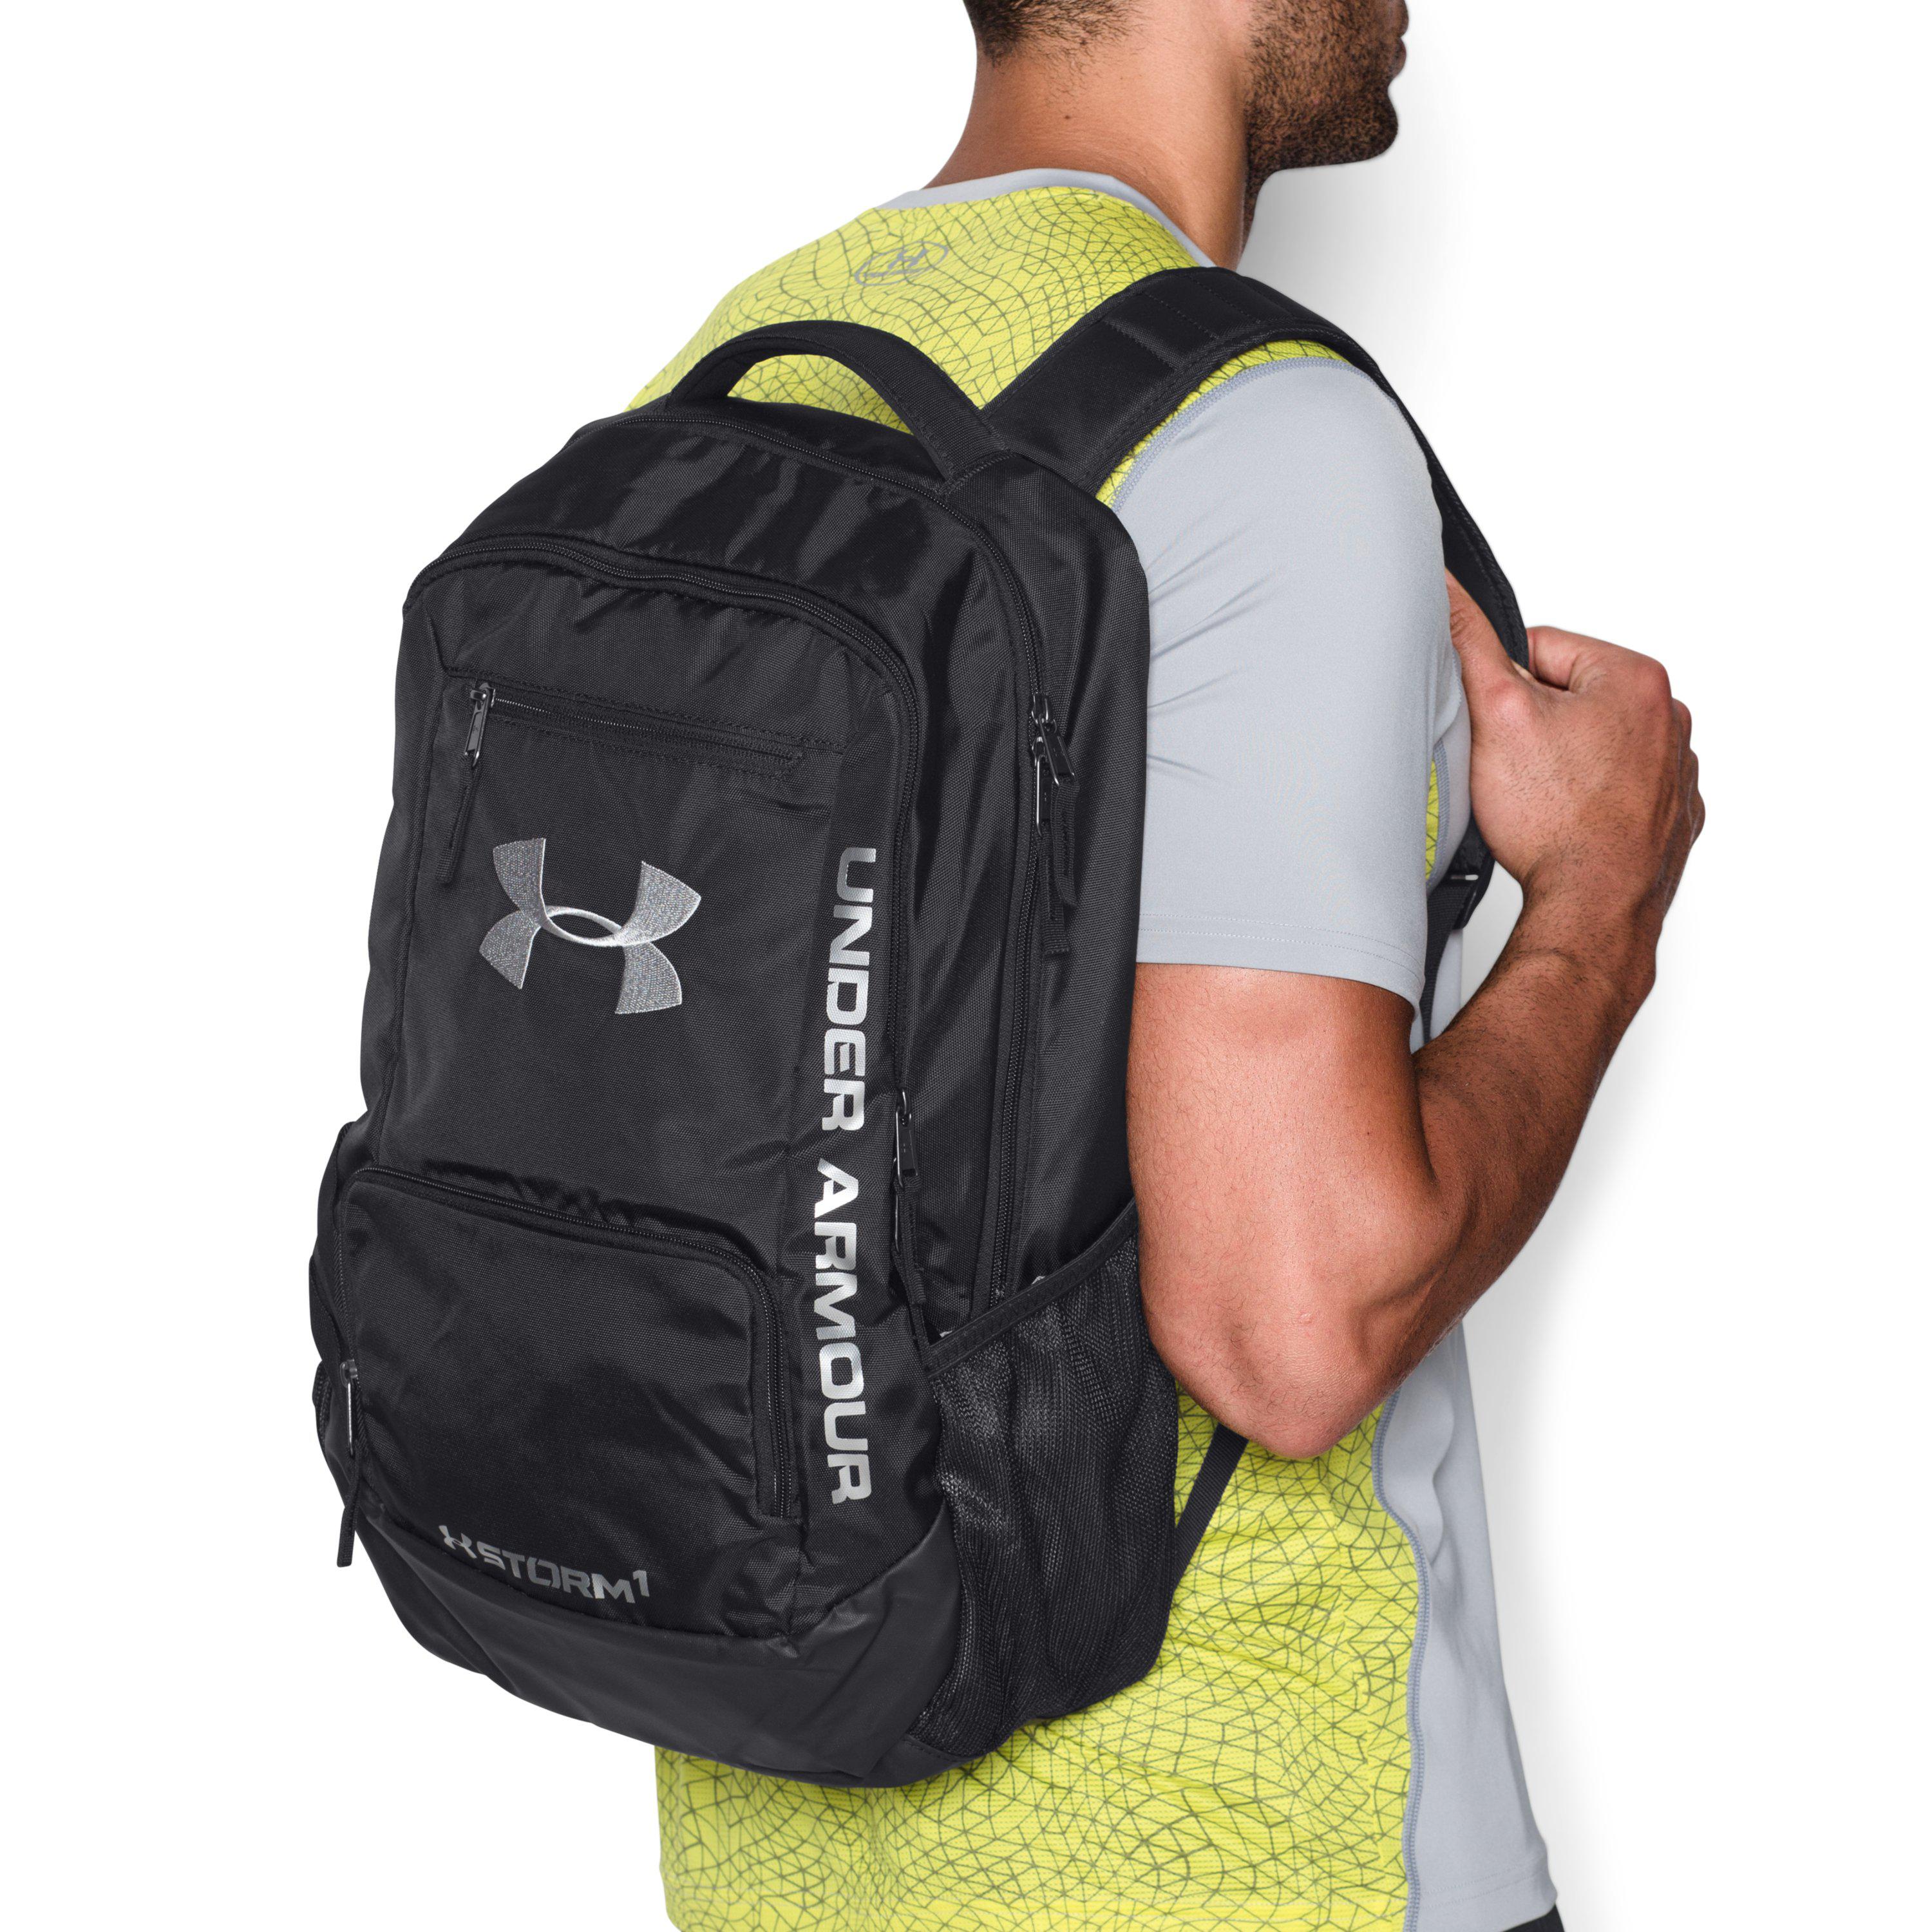 Under Armour Storm Recruit Laptop Backpack Graphite/Overcast Gray  1261825-041 - Best Buy